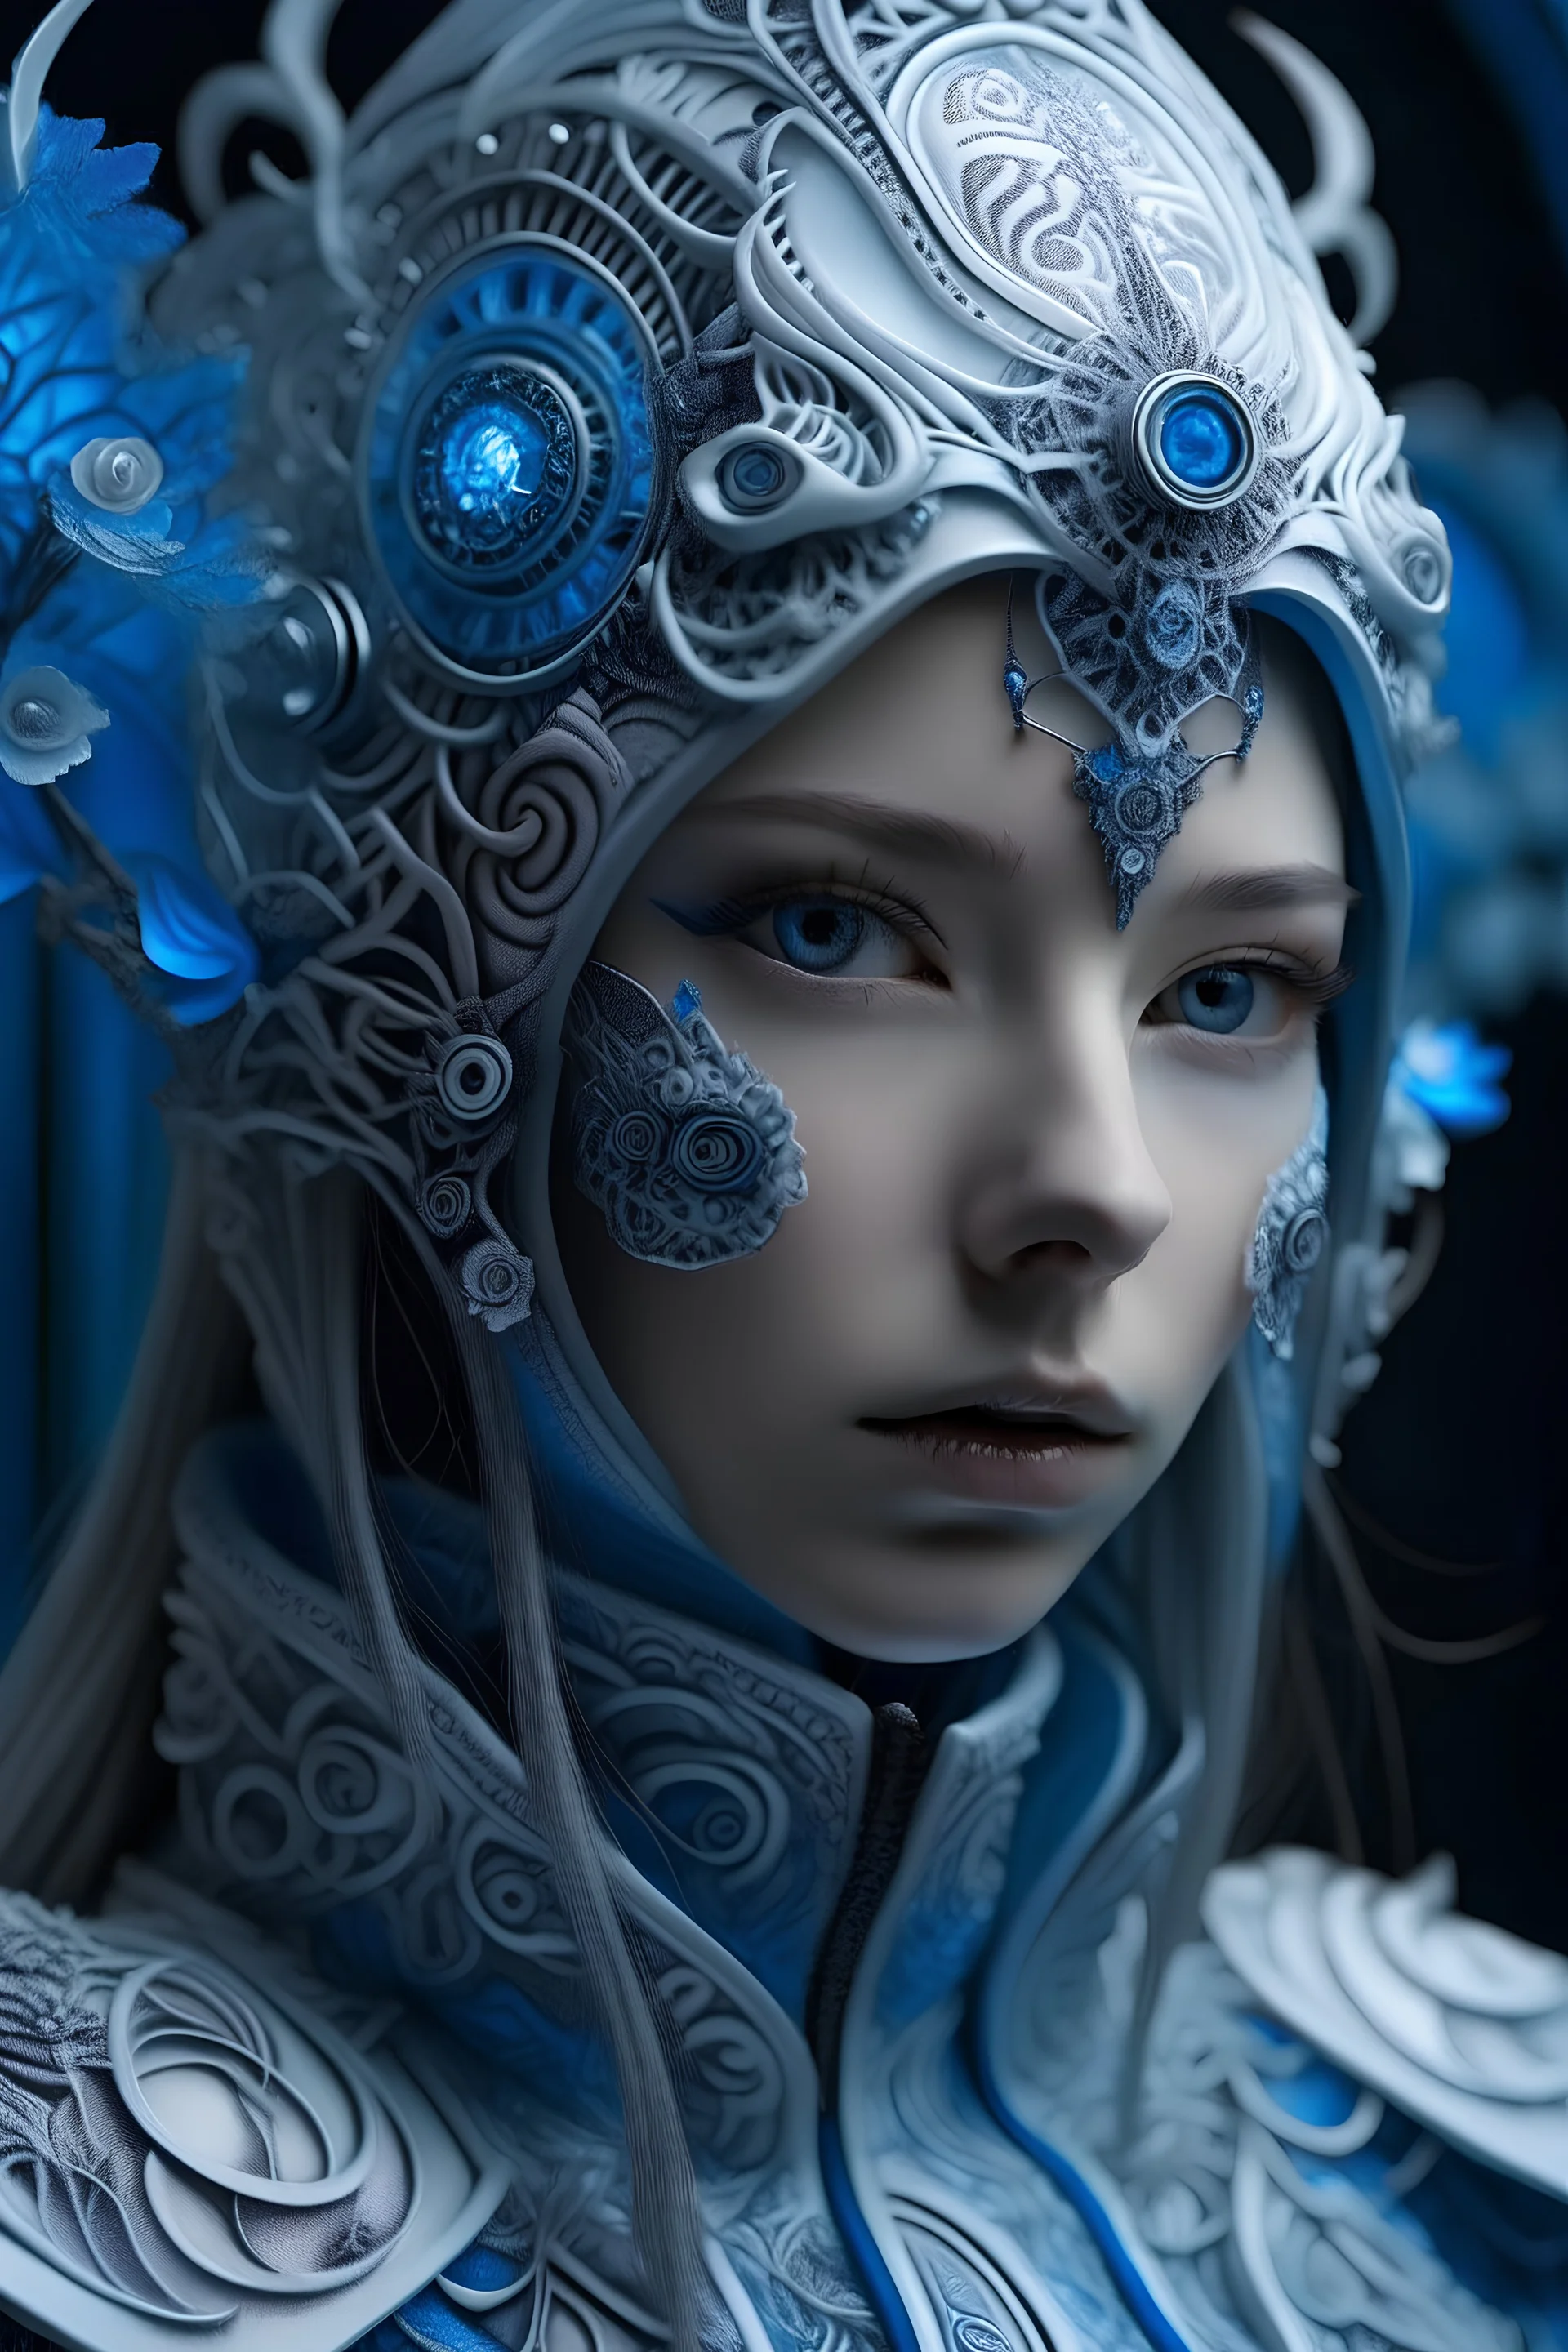 Beautiful faced young biomechanical winter queen girl wearing silver biomechanical white metallic filigree floral face masque, ribbed with bioluminescense blue zafír biomechanical silver metallic diadem headress, wearing biomechanical amalgamation style leather jacket dress ribbed with silver floral metallic filigree biomechanical vantablack pattern, organic bio spinal ribbed detail of gothic winter backround extremely detailed maximalist hyperrealistic portrait art